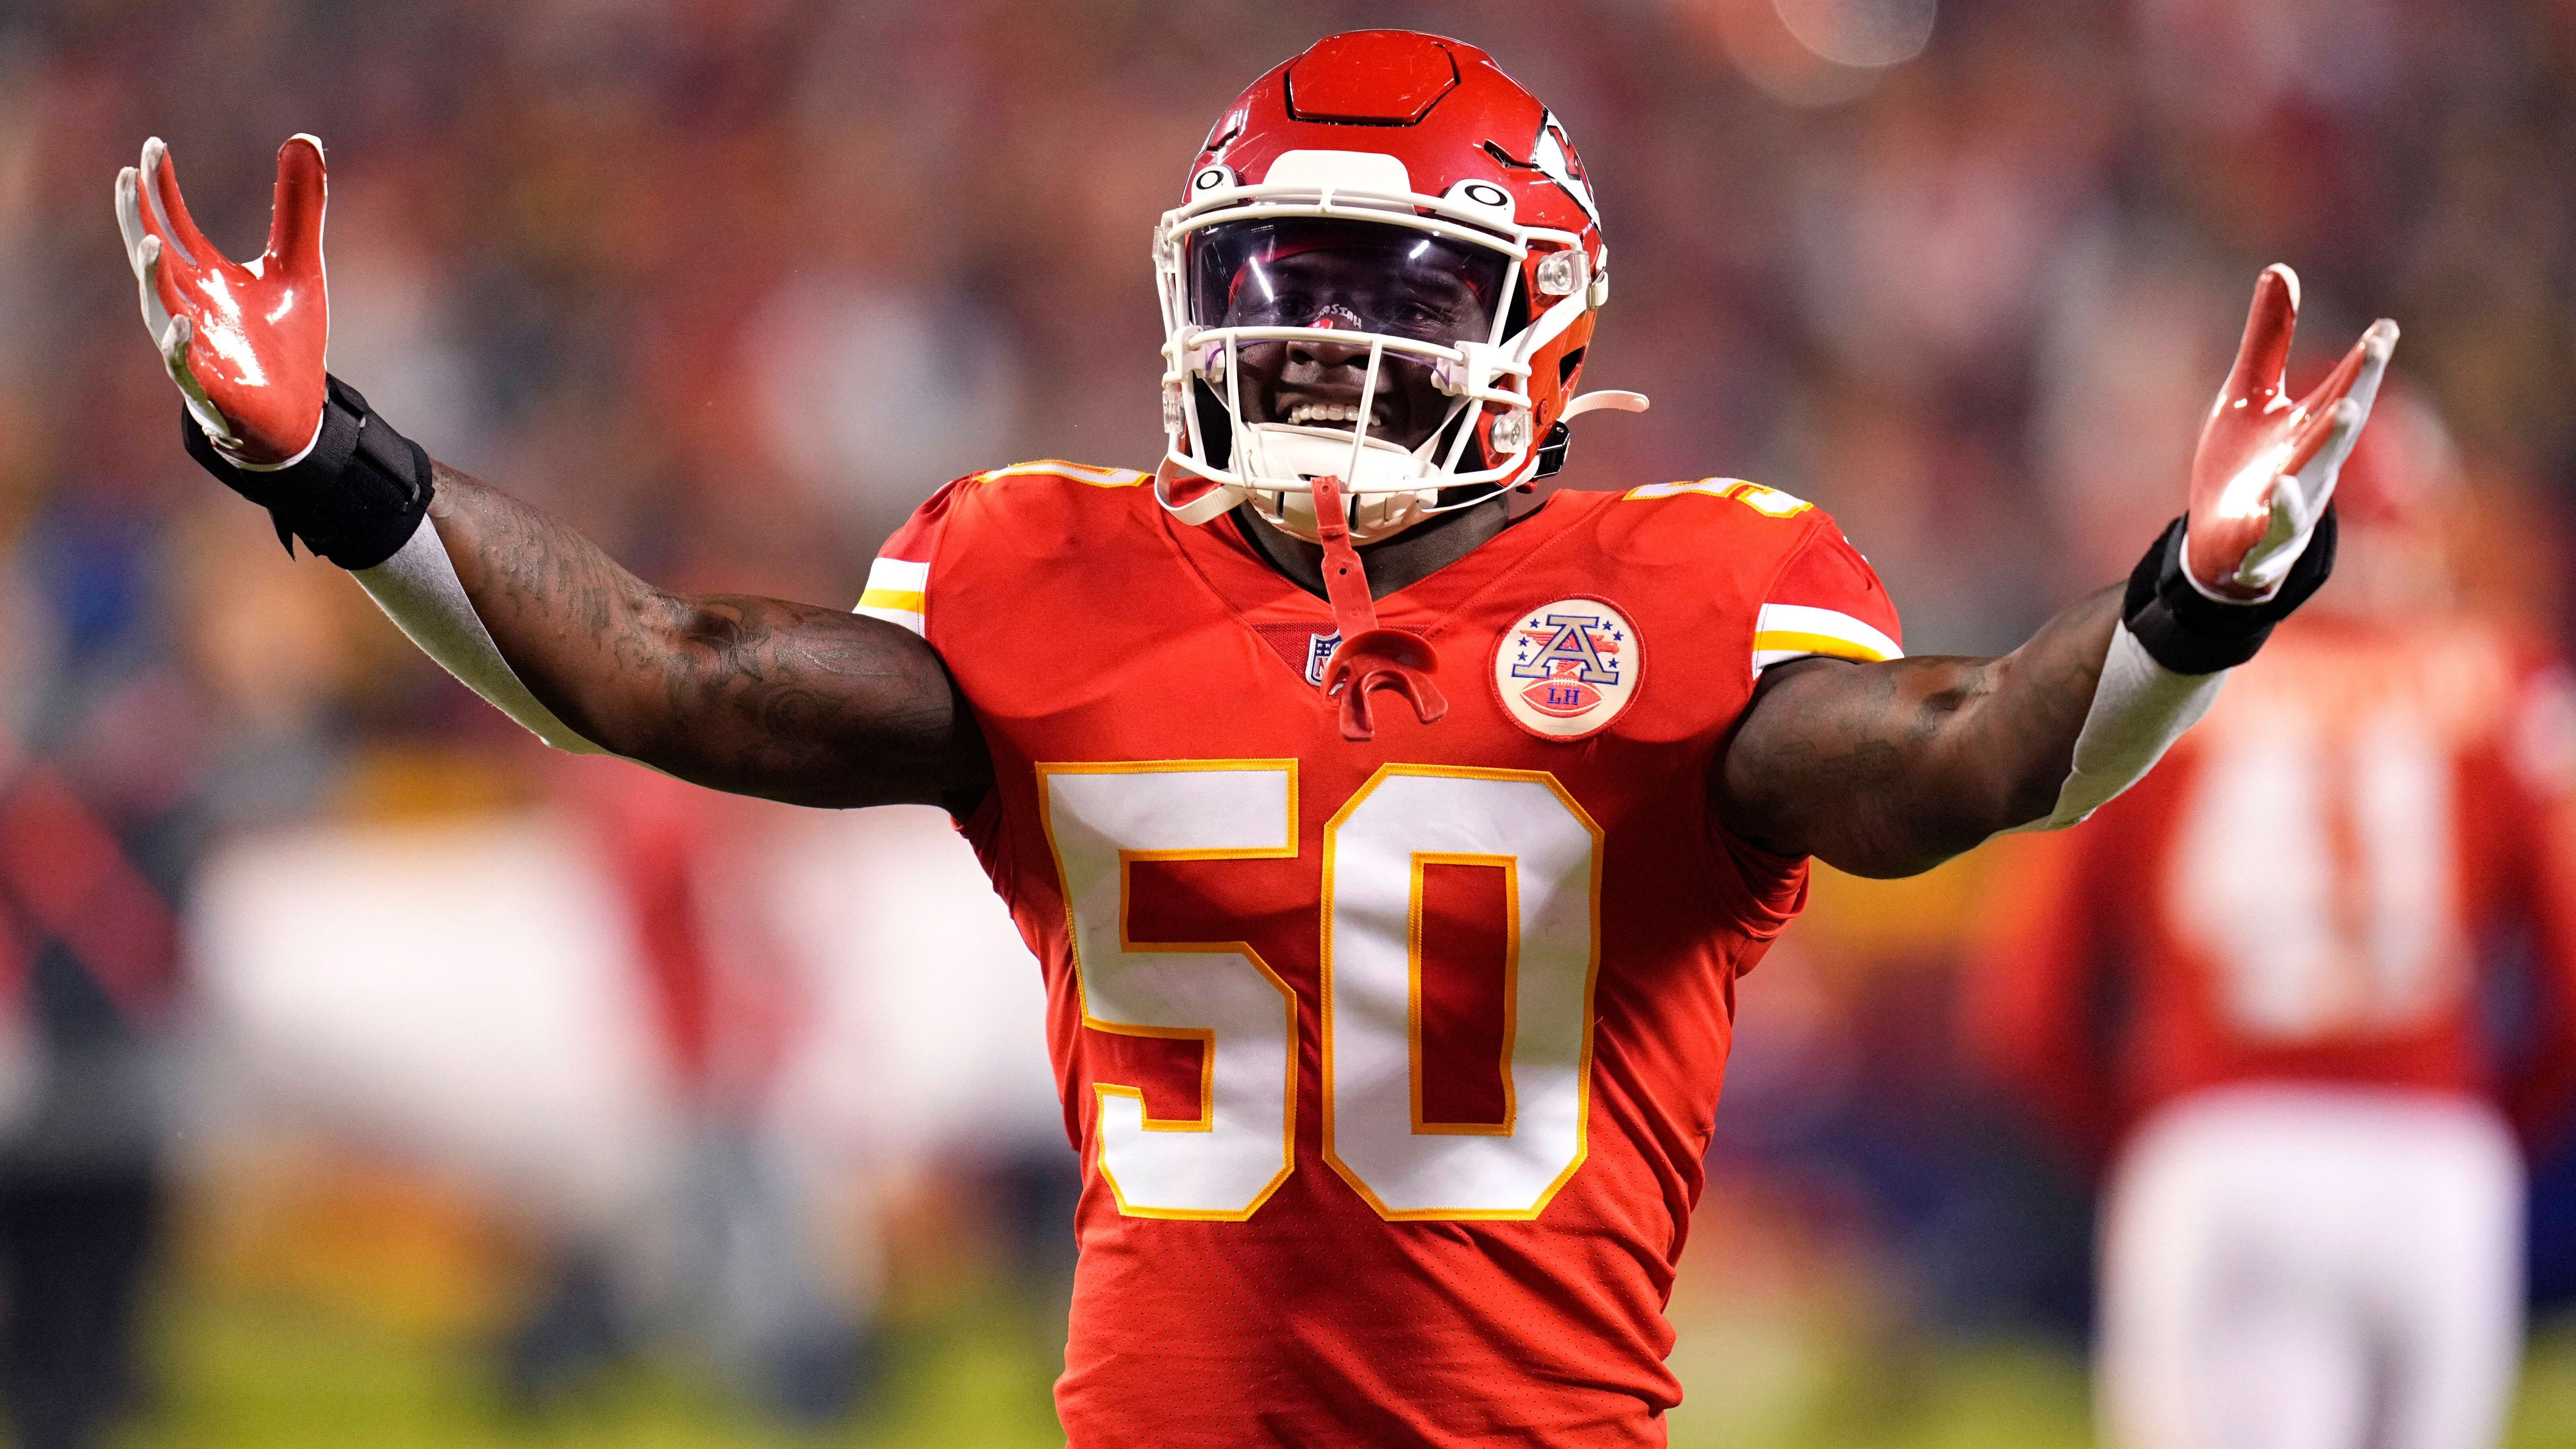 <strong>Middlelinebacker: Willie Gay Jr. (Kansas City Chiefs)</strong><br>Total-Tackles: 58 <br>Tackles-For-Loss: 1 <br>Sacks: 1 <br>Forced Fumbles: 1 Interceptions: 1 Pass-Deflections: 4